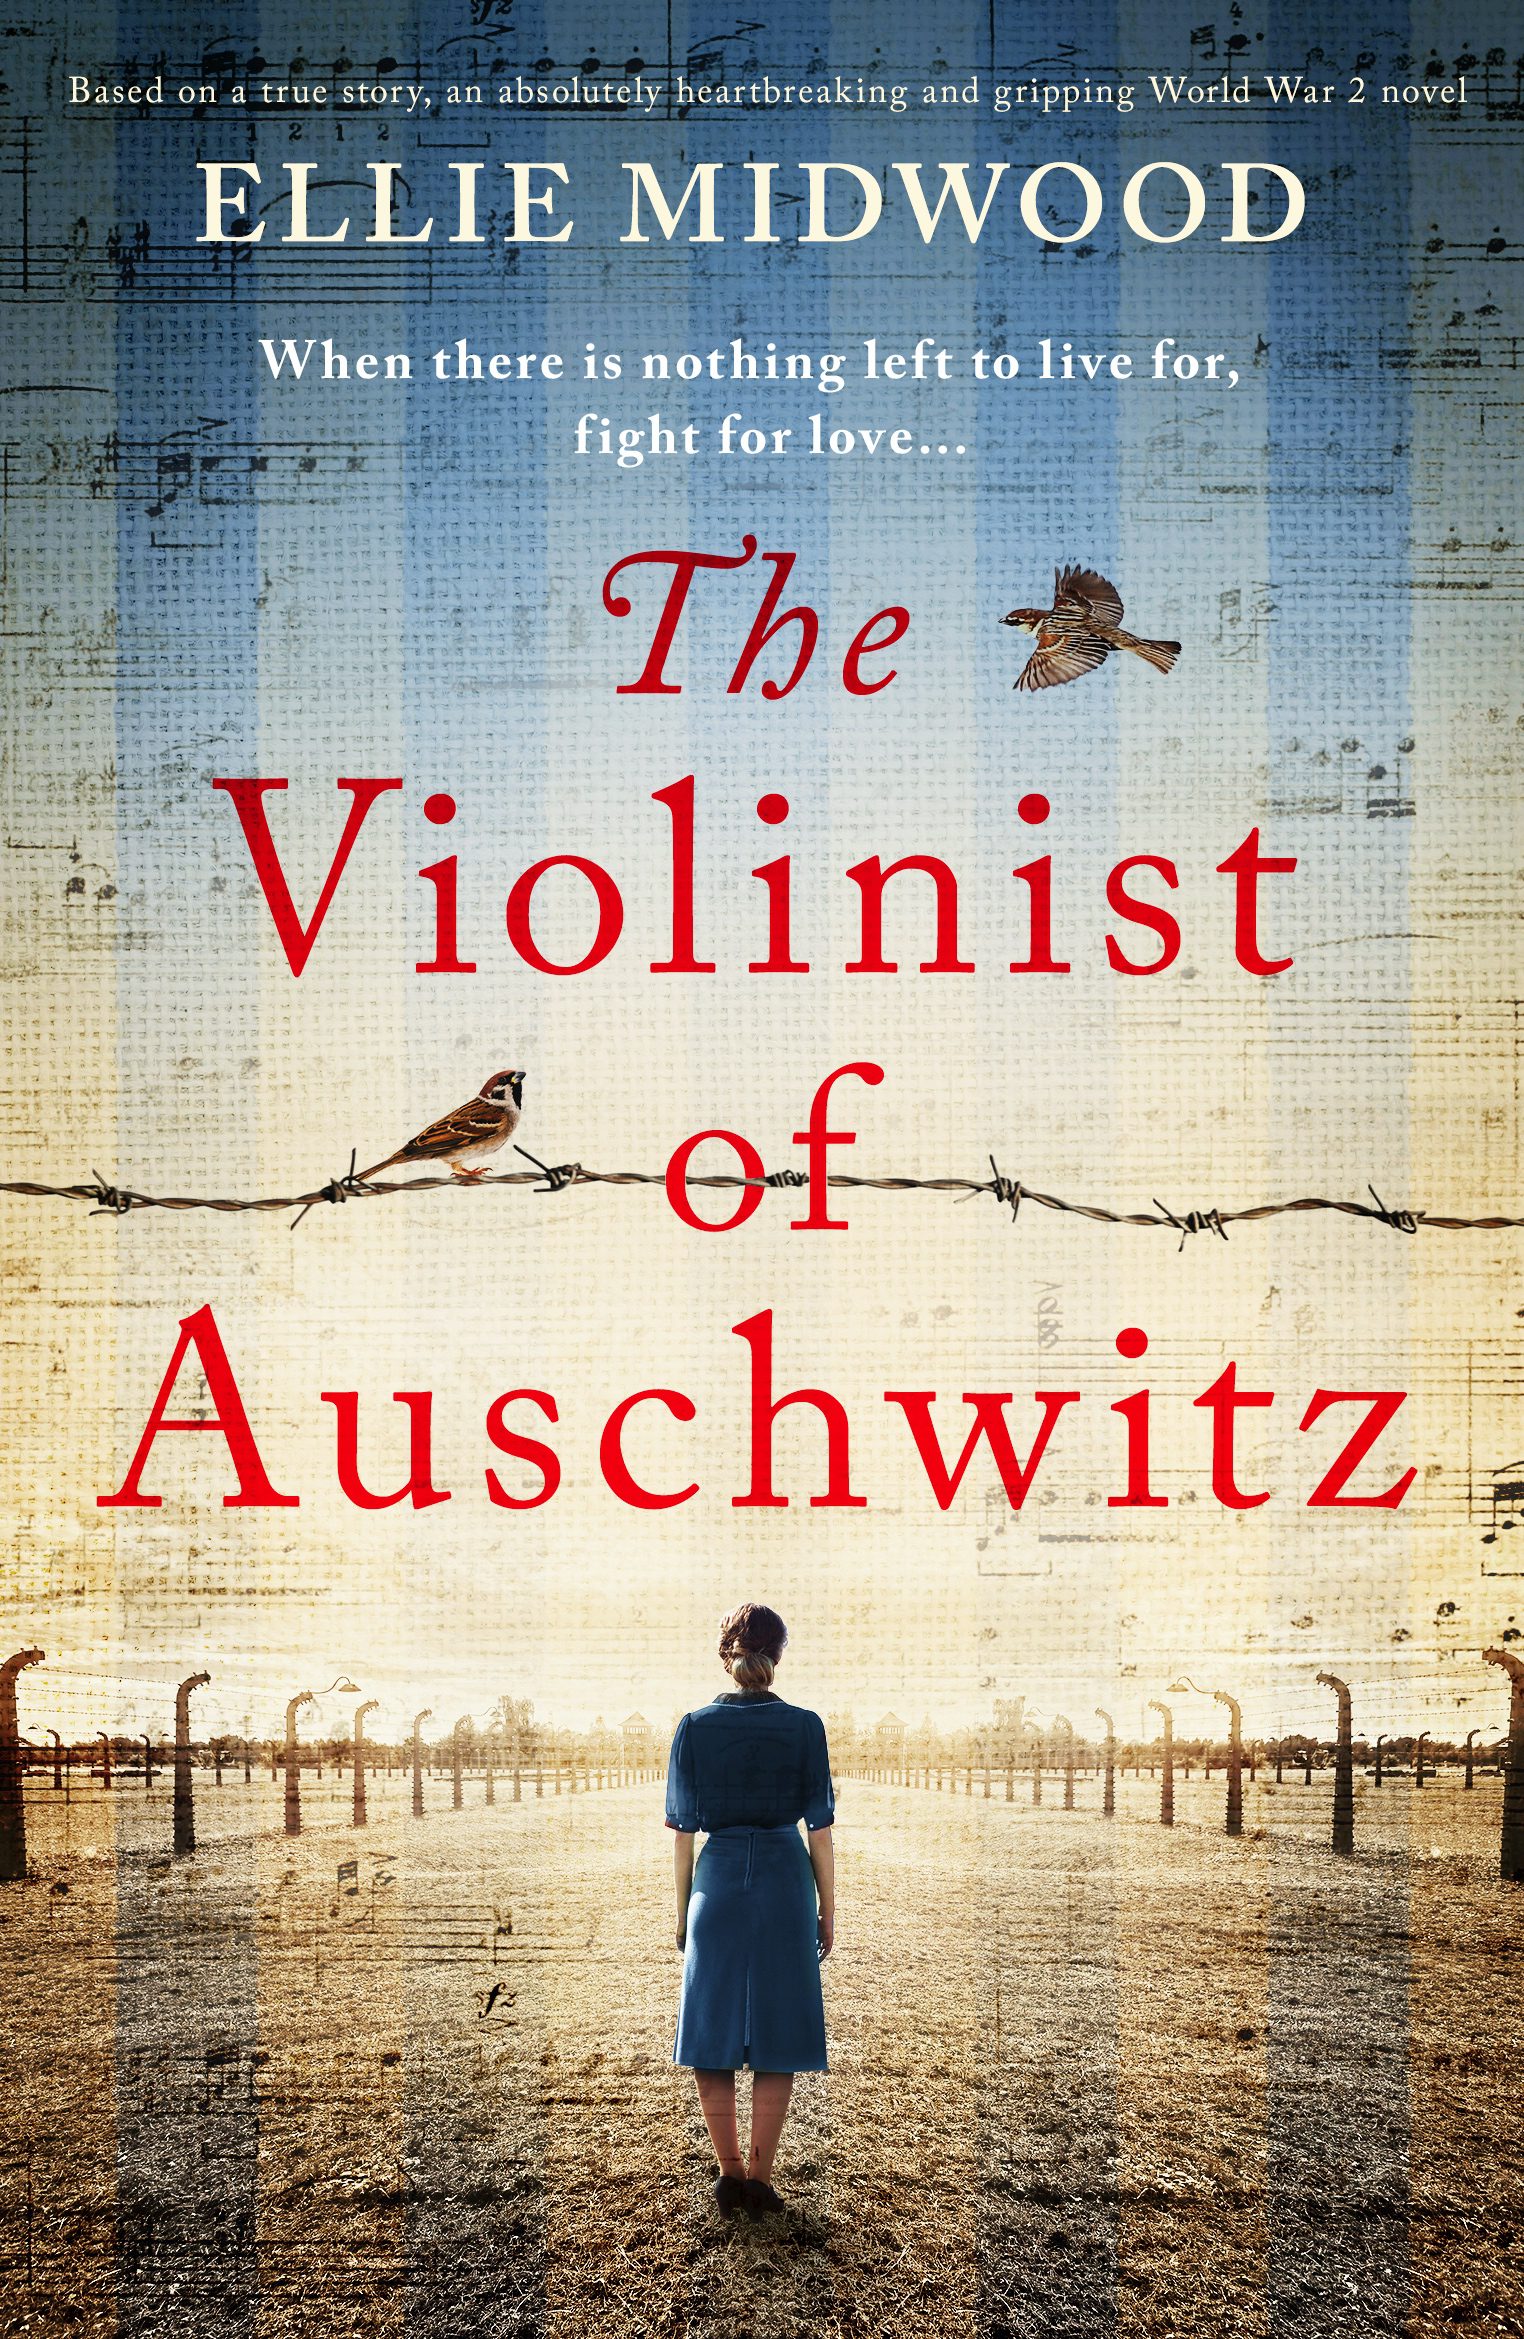 The Violinist of Auschwitz book cover